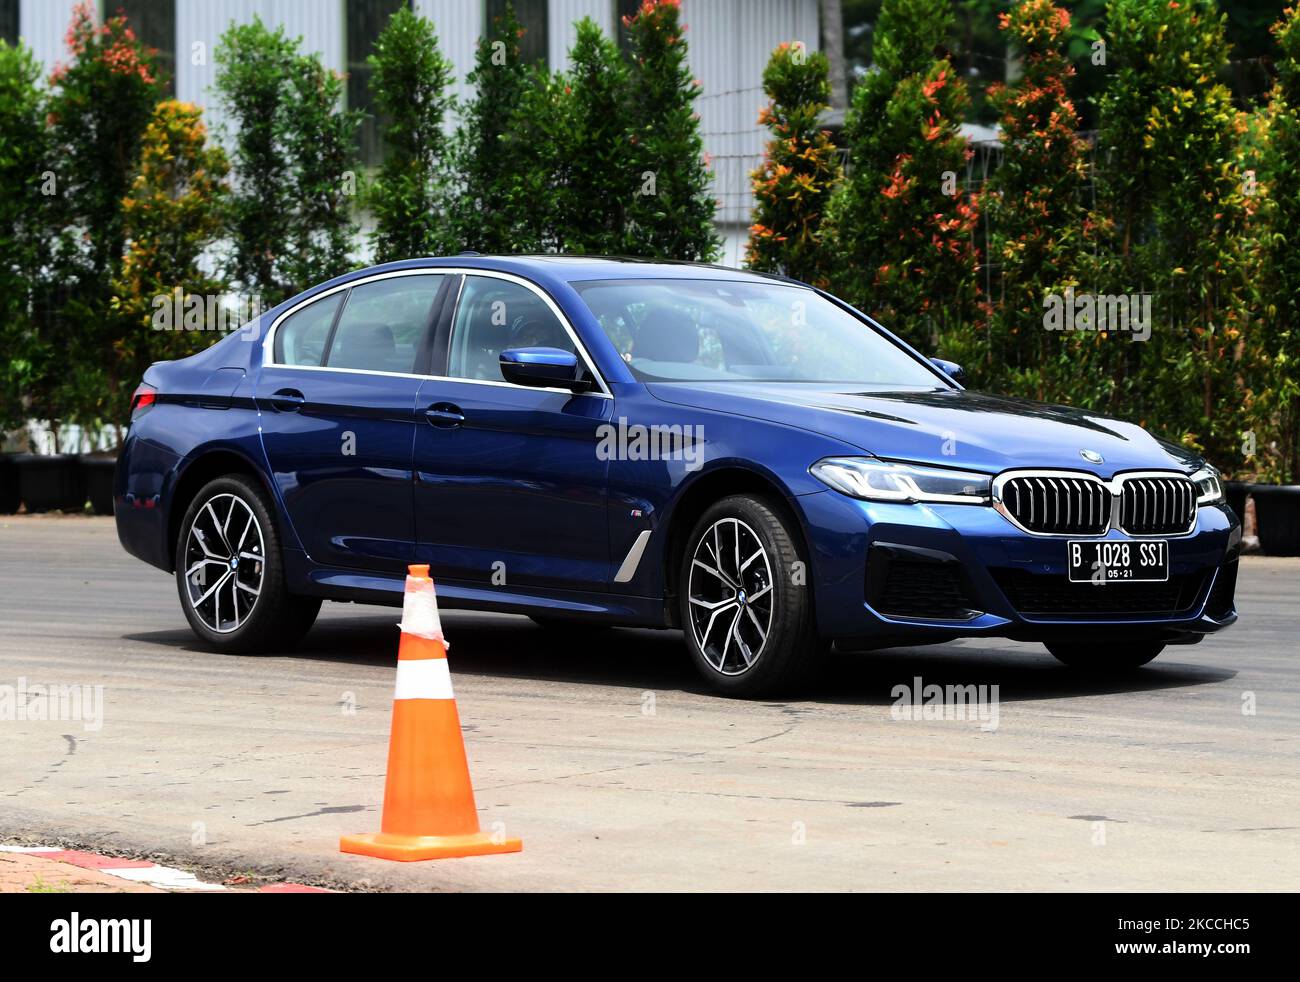 The new BMW ''The New 5'' Type BMW 520i M Sport shows excellence in the driving test at the BMW Test Day event in Karawaci, Tangerang, Banten, on April, 10, 2021. This business sedan car assembled in Indonesia boasts an exclusive interior and comfort. when in or in the wheelhouse with safety sensor facilities while driving and priced at Rp1.1 billion. (Photo by Dasril Roszandi/NurPhoto) Stock Photo